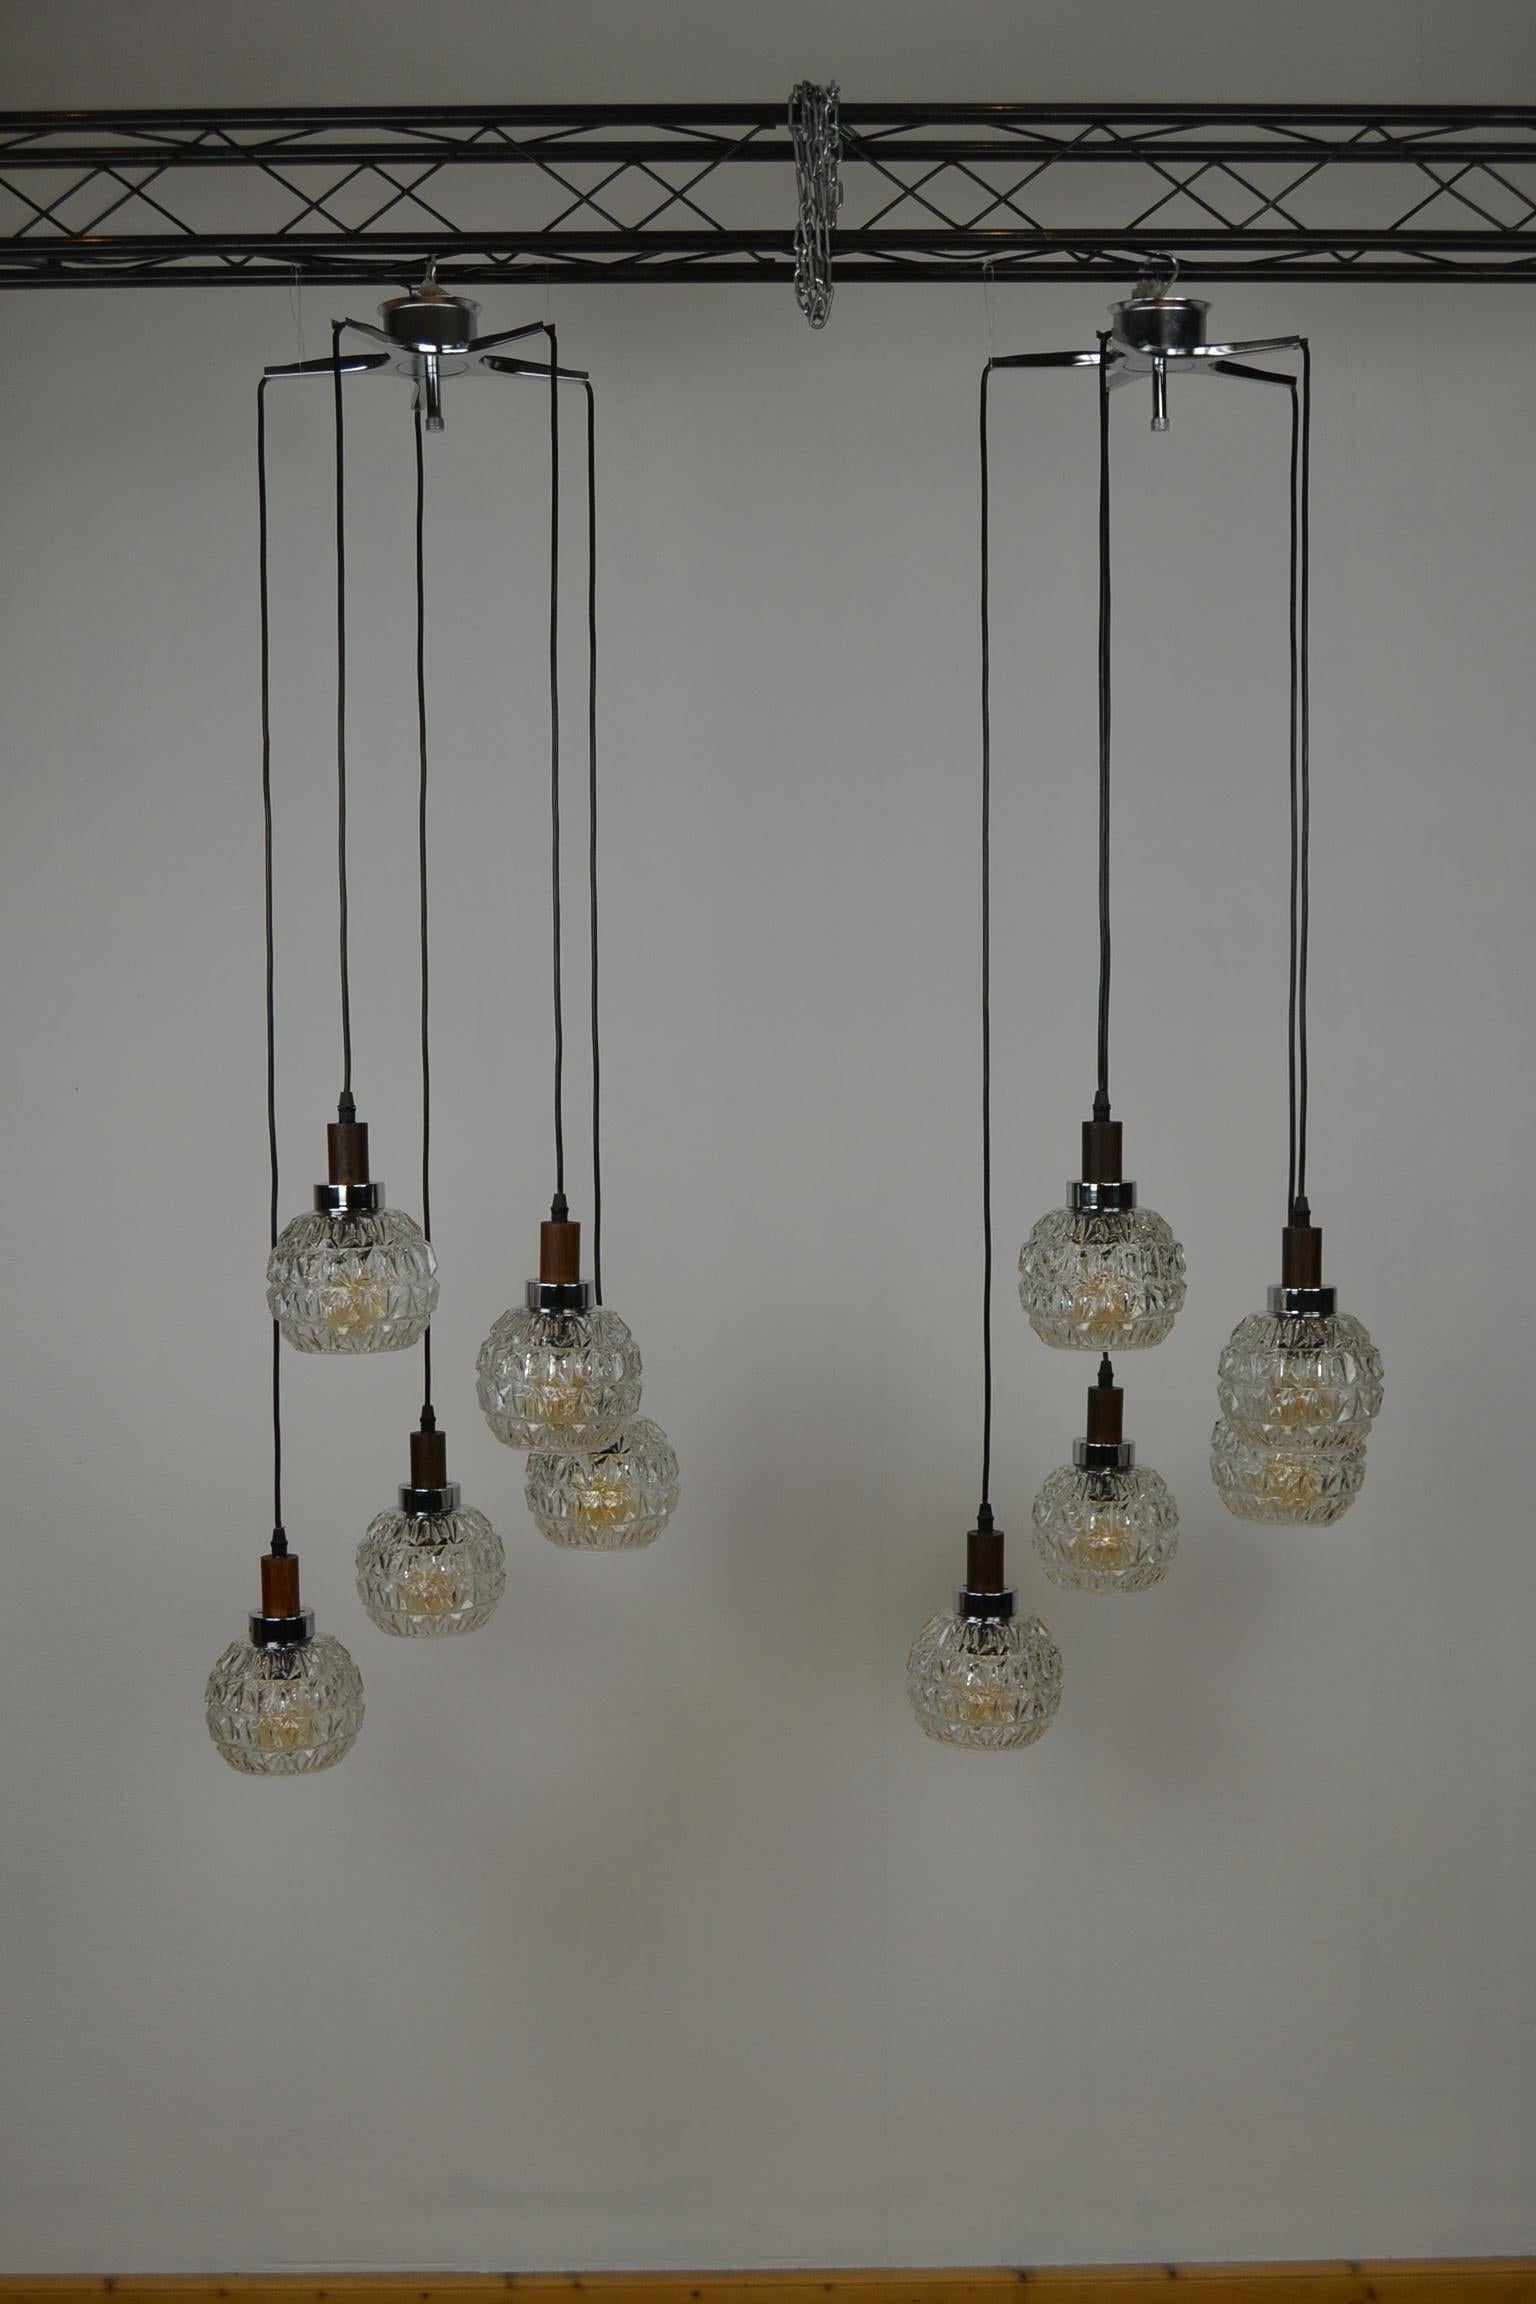 Midcentury pendant lights with each 5 lights.
Each pendant light has a star shaped metal suspending, 5 wiring at different heights with an open art glass shade with chromed ring and wooden hanging.
Each light points needs an E27 bulb.

These vintage